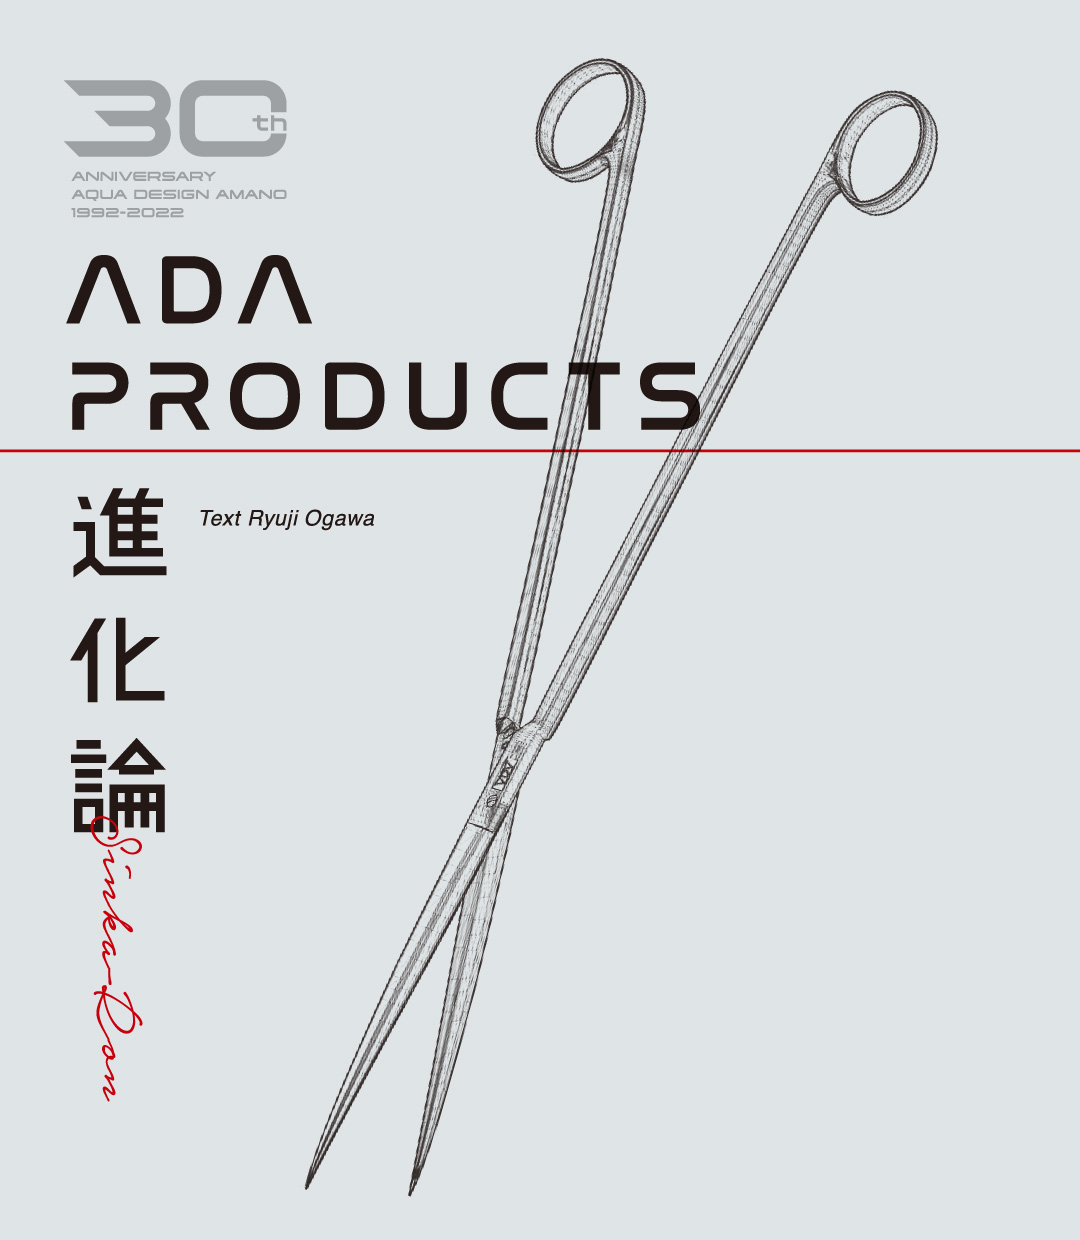 ADA PRODUCTS -The theory of evolution- #5. SCISSORS SERIES